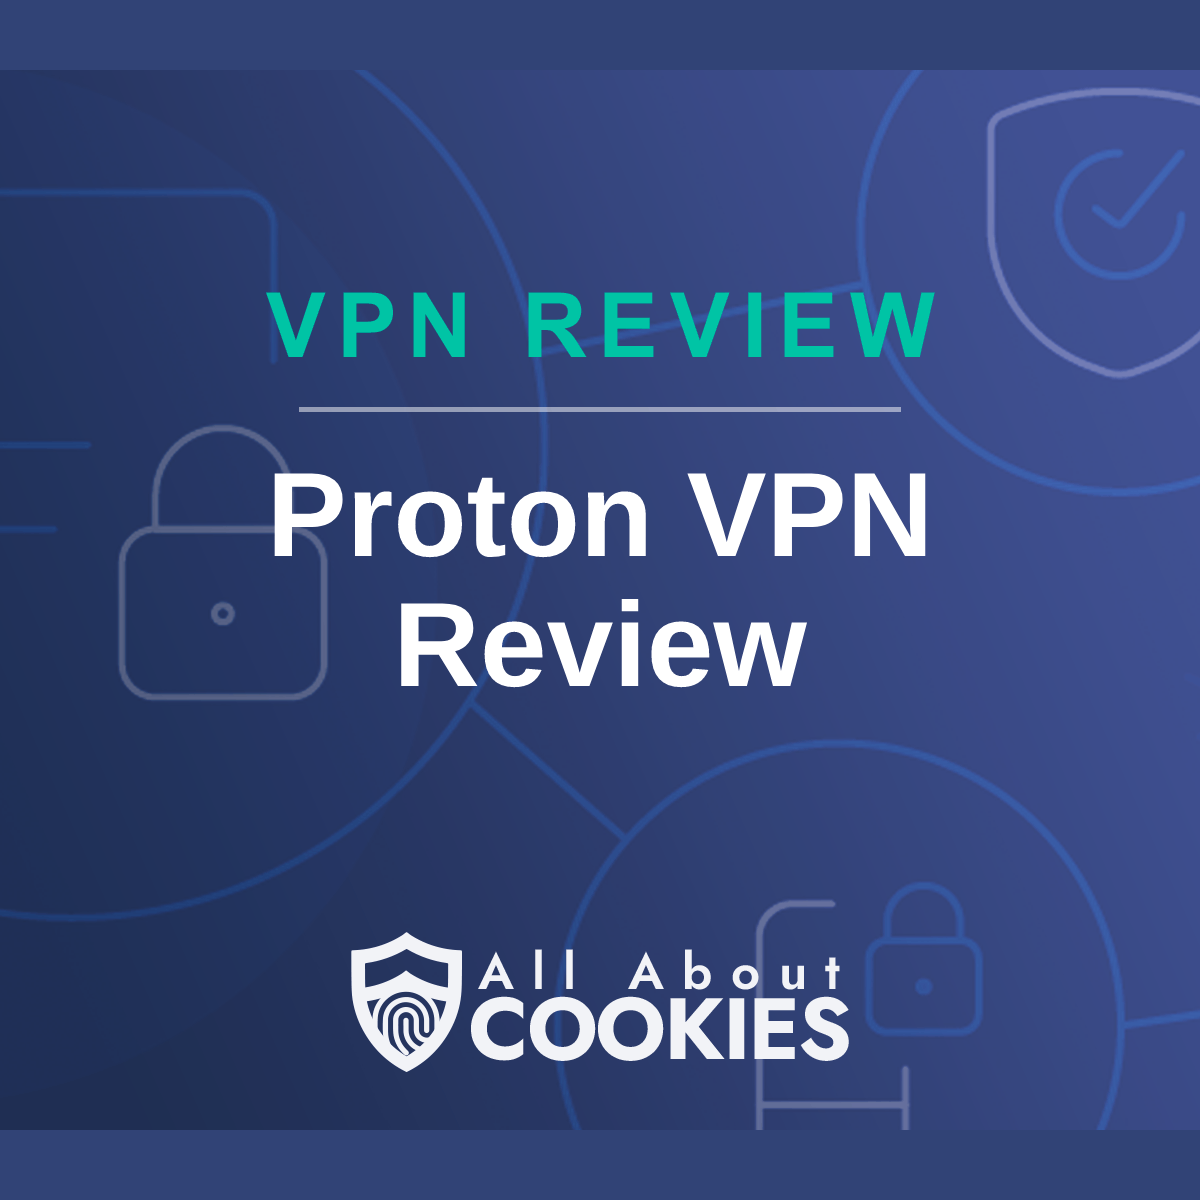 A blue background with images of locks and shields with the text &quot;Proton VPN Review&quot; and the All About Cookies logo. 